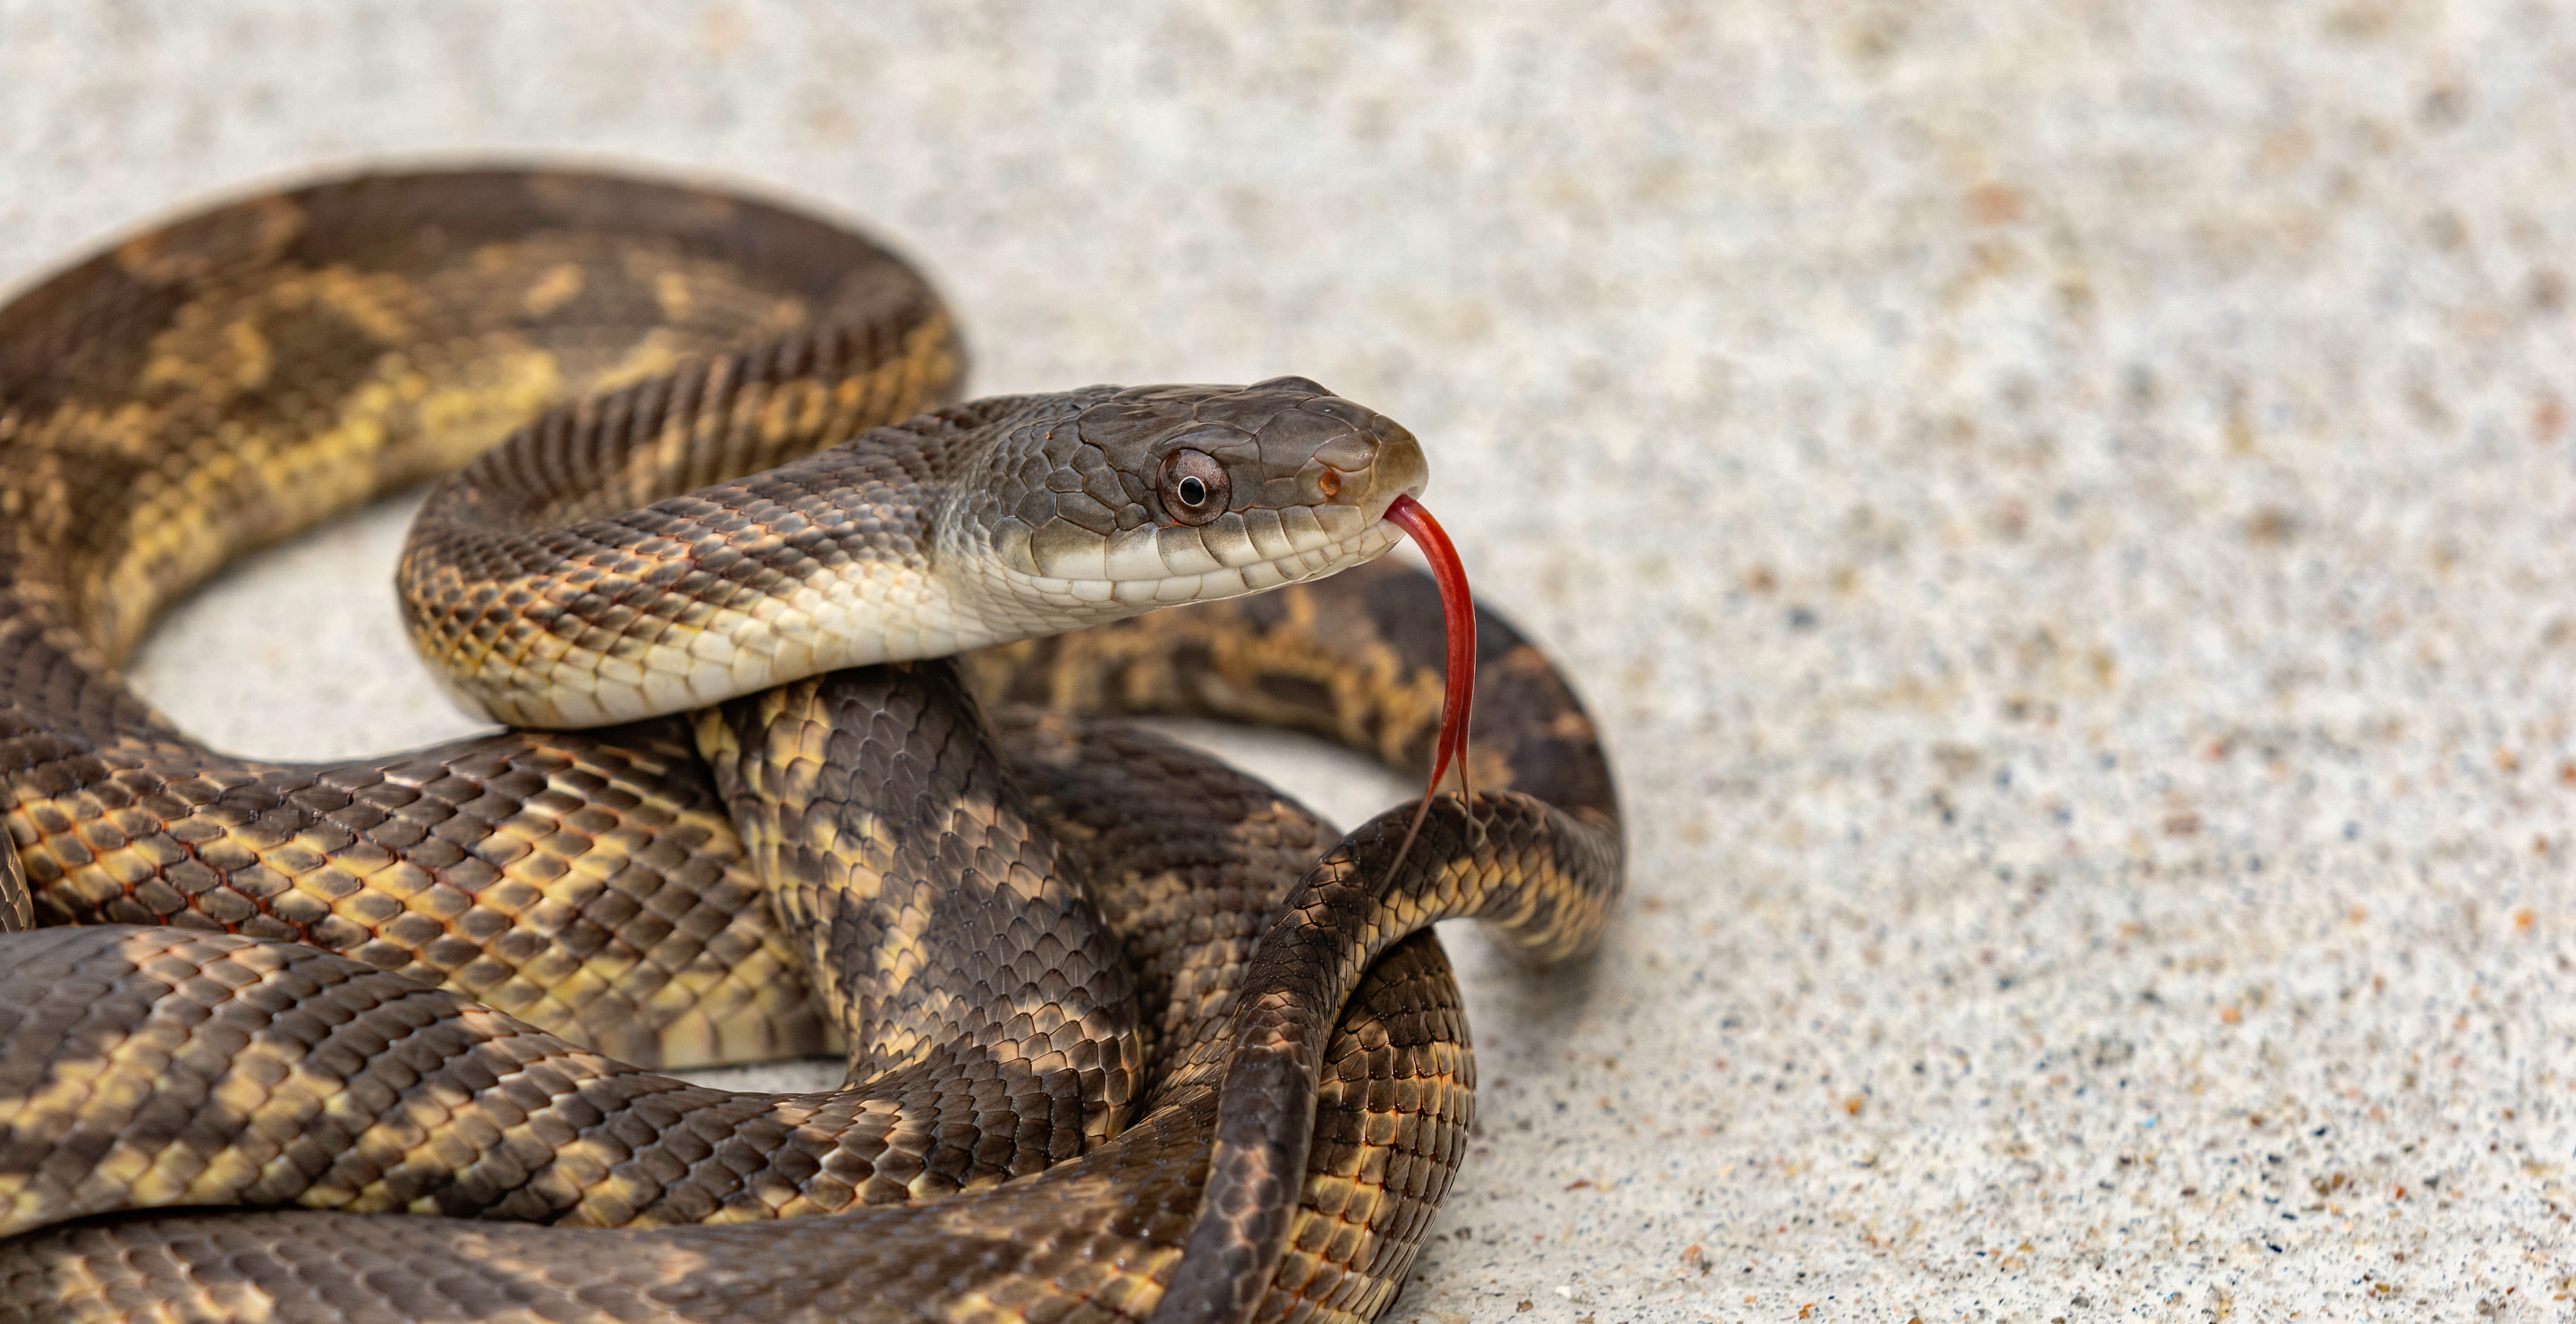 Man Tries To Smuggle 100 Snakes Into China In His Pants